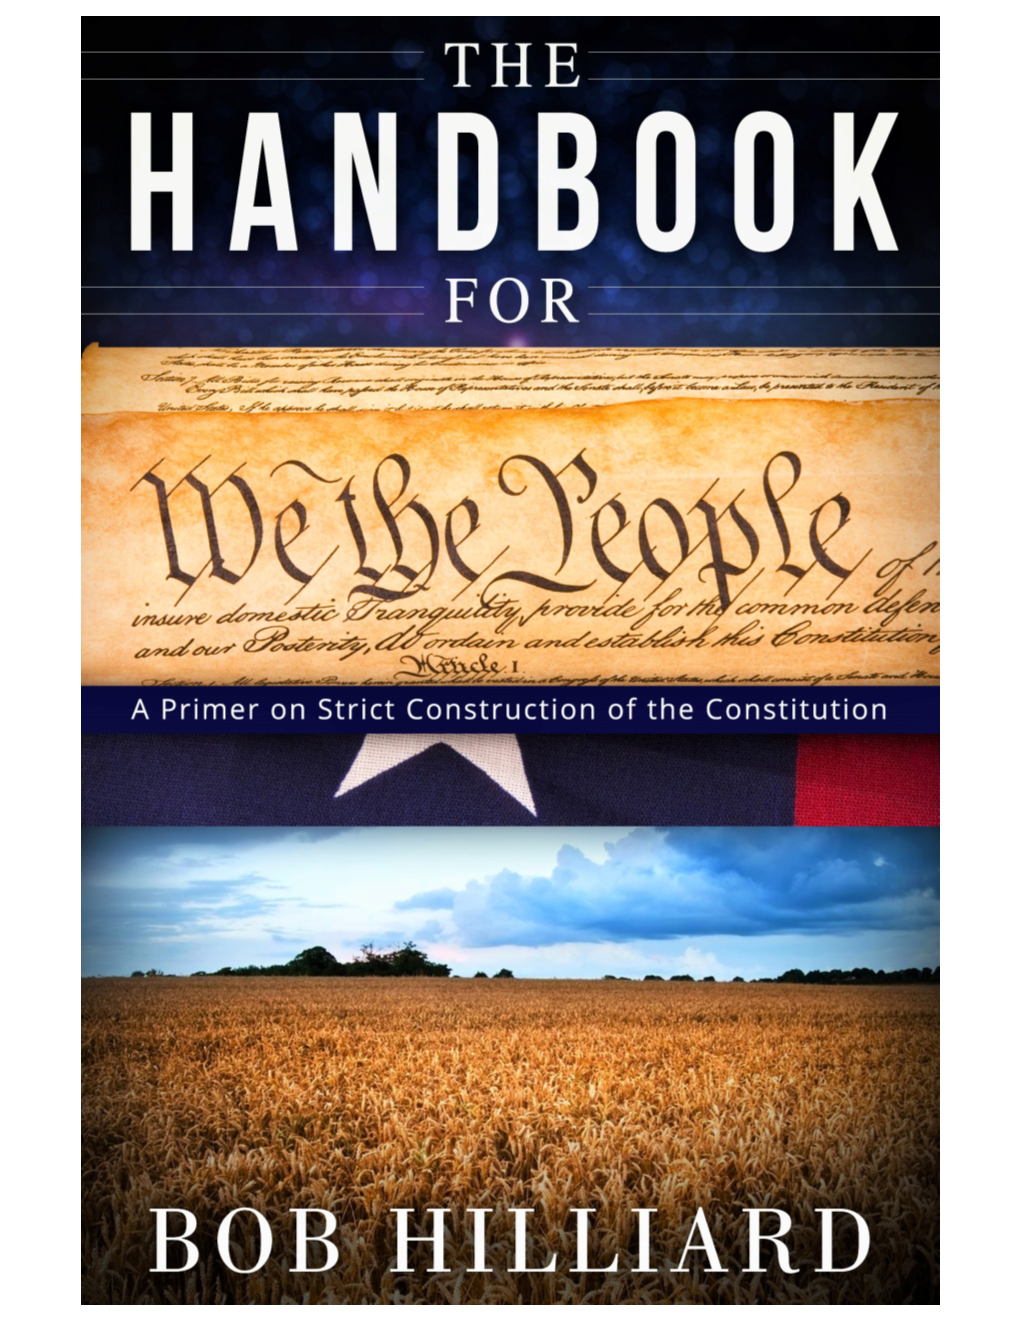 "The Handbook for We the People"